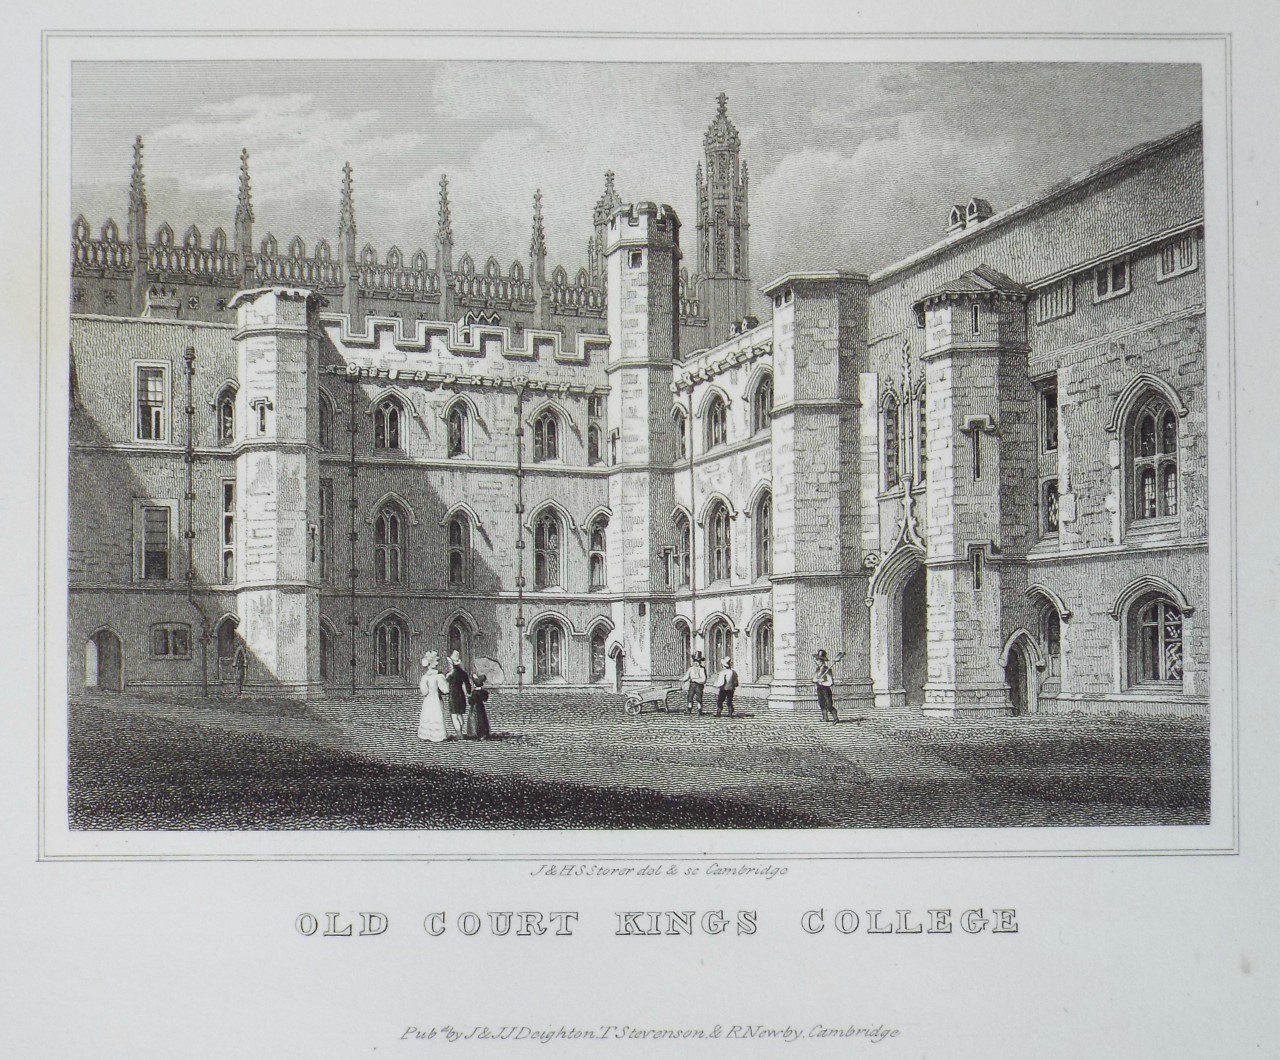 Print - Old Court Kings College - Storer